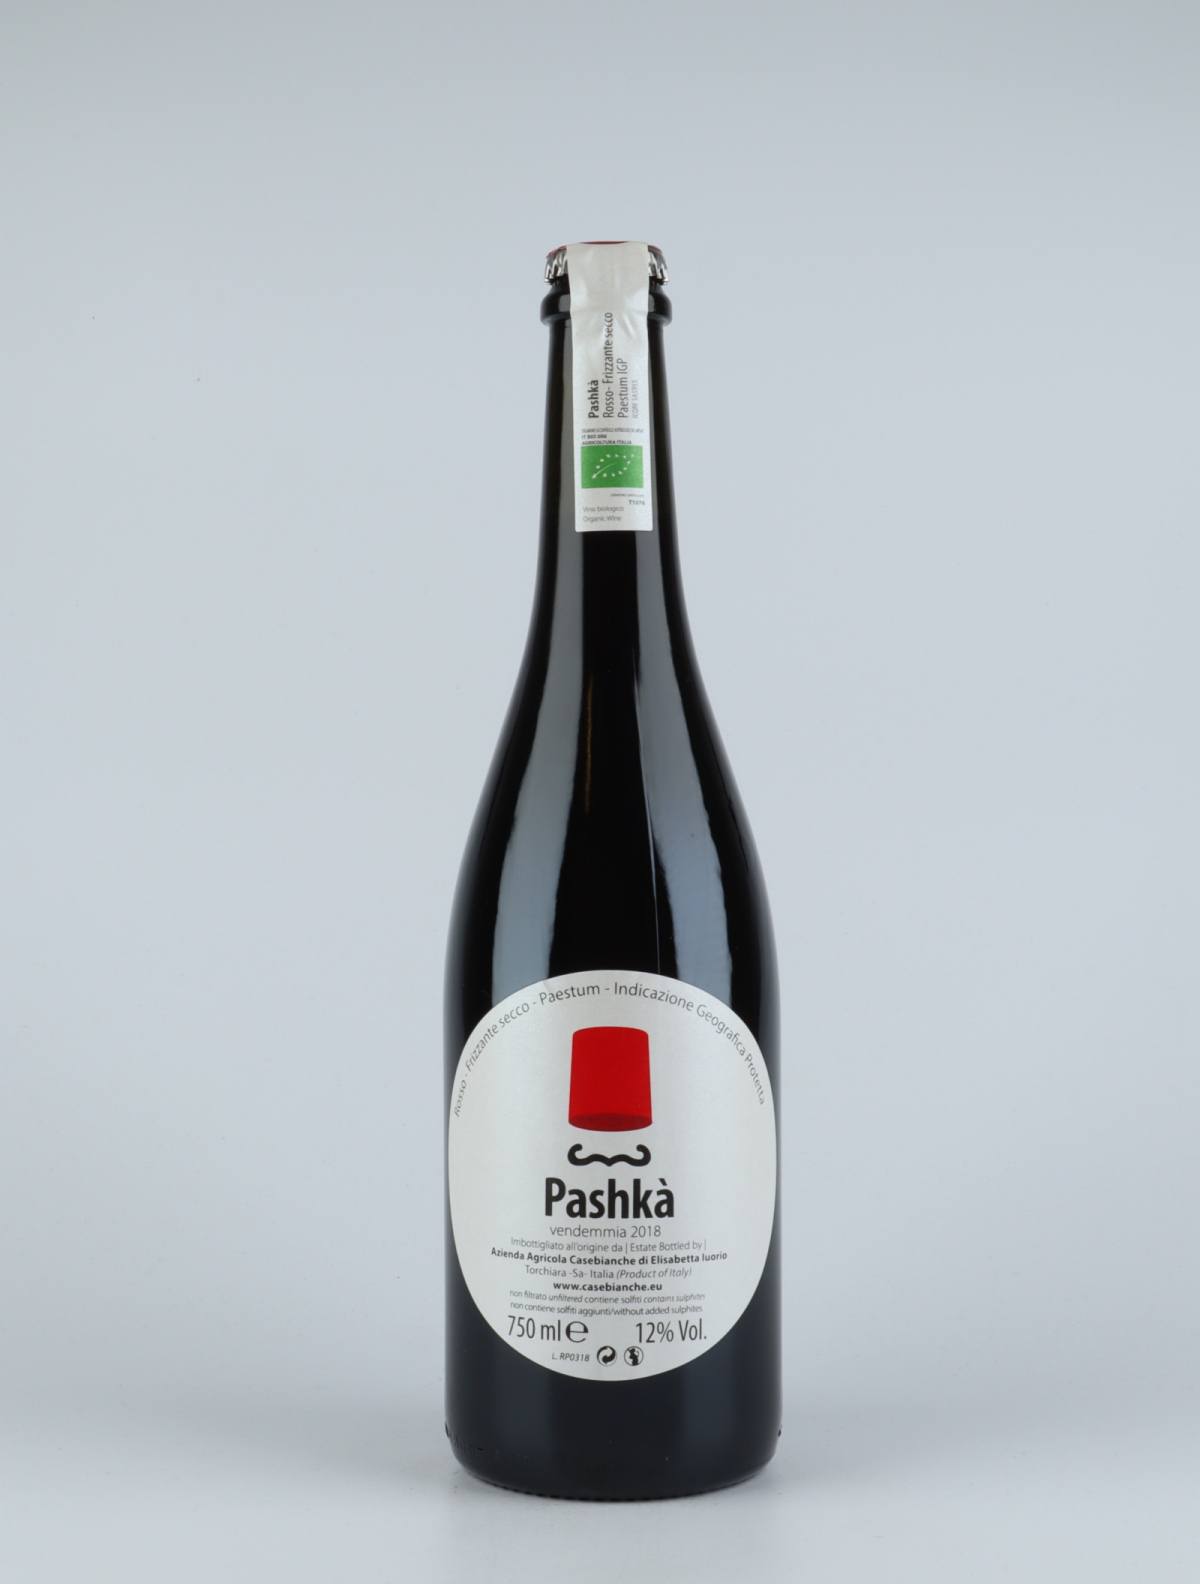 A bottle 2018 Pashkà Sparkling from Casebianche, Campania in Italy